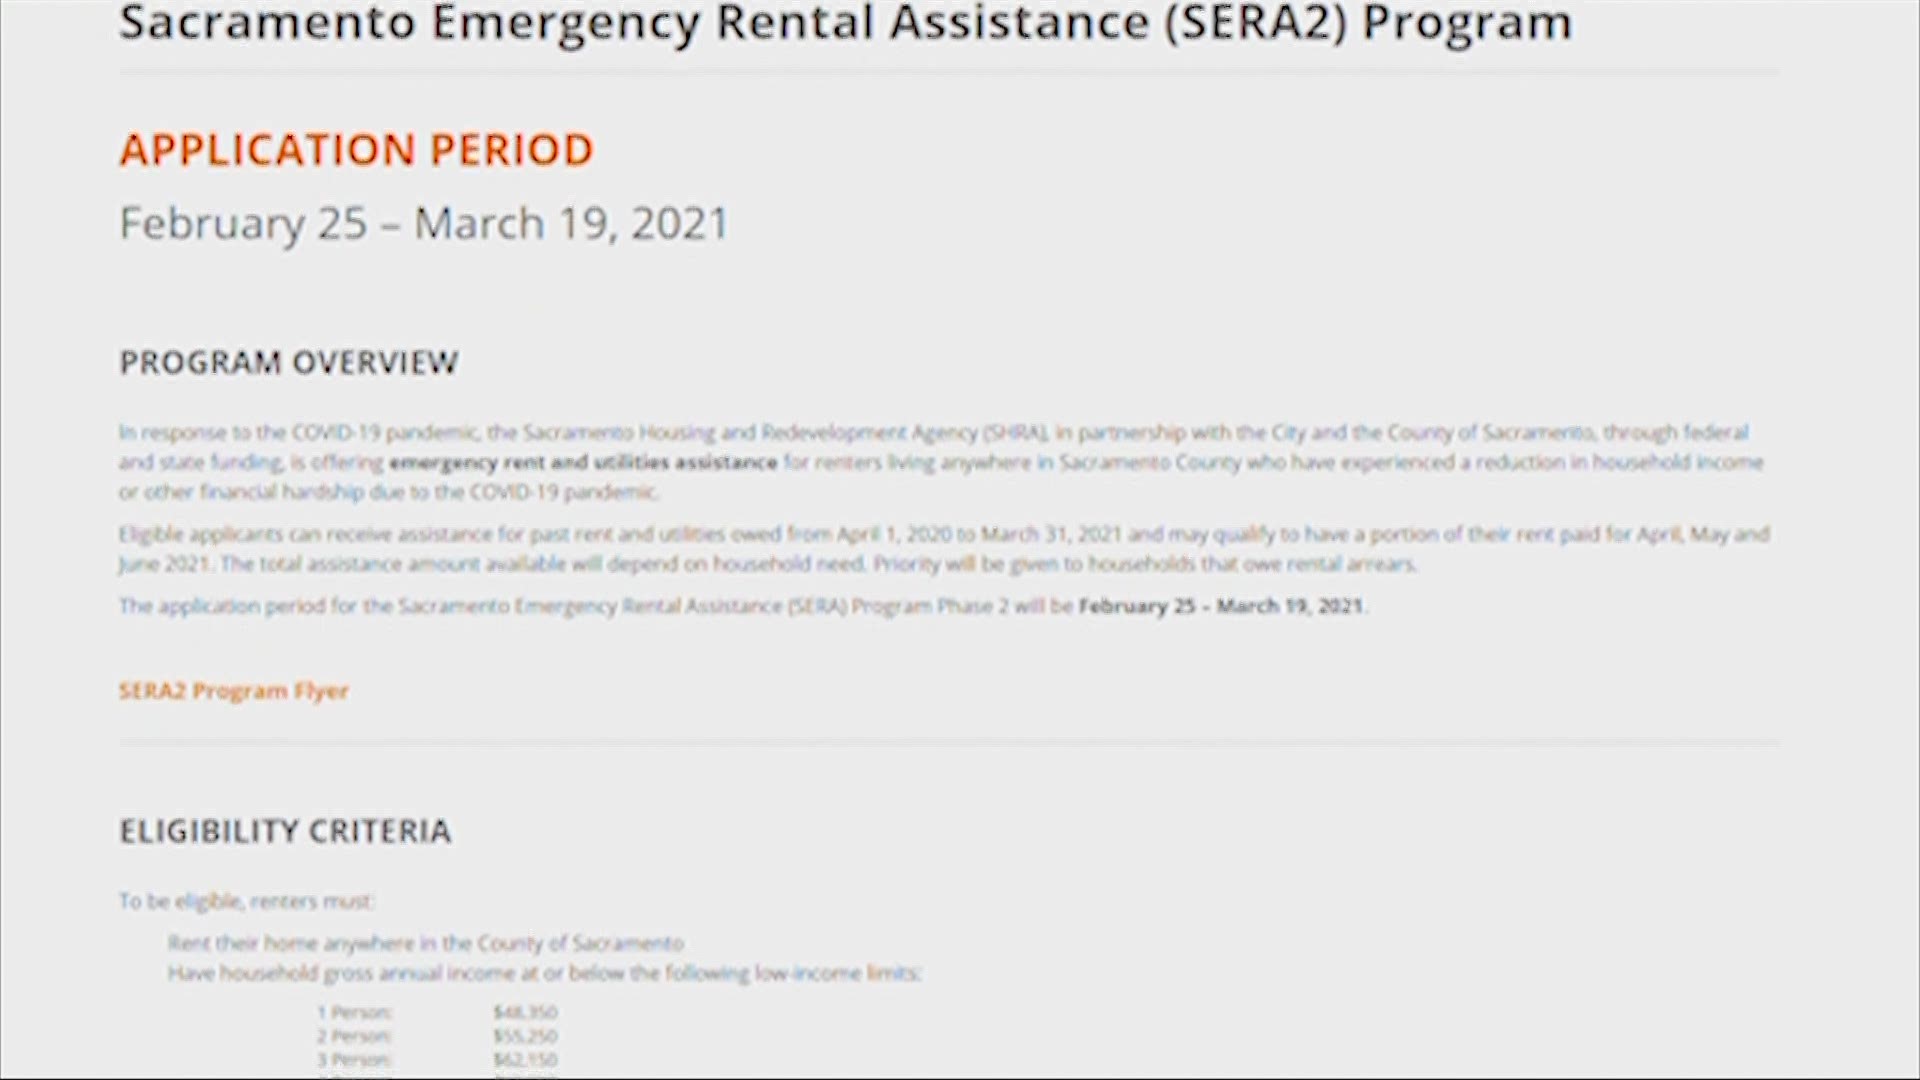 Applicants must apply by 11:59 p.m. Friday, March 19, for rental assistance in Sacramento County. But if you don't have all your information, that's OK.